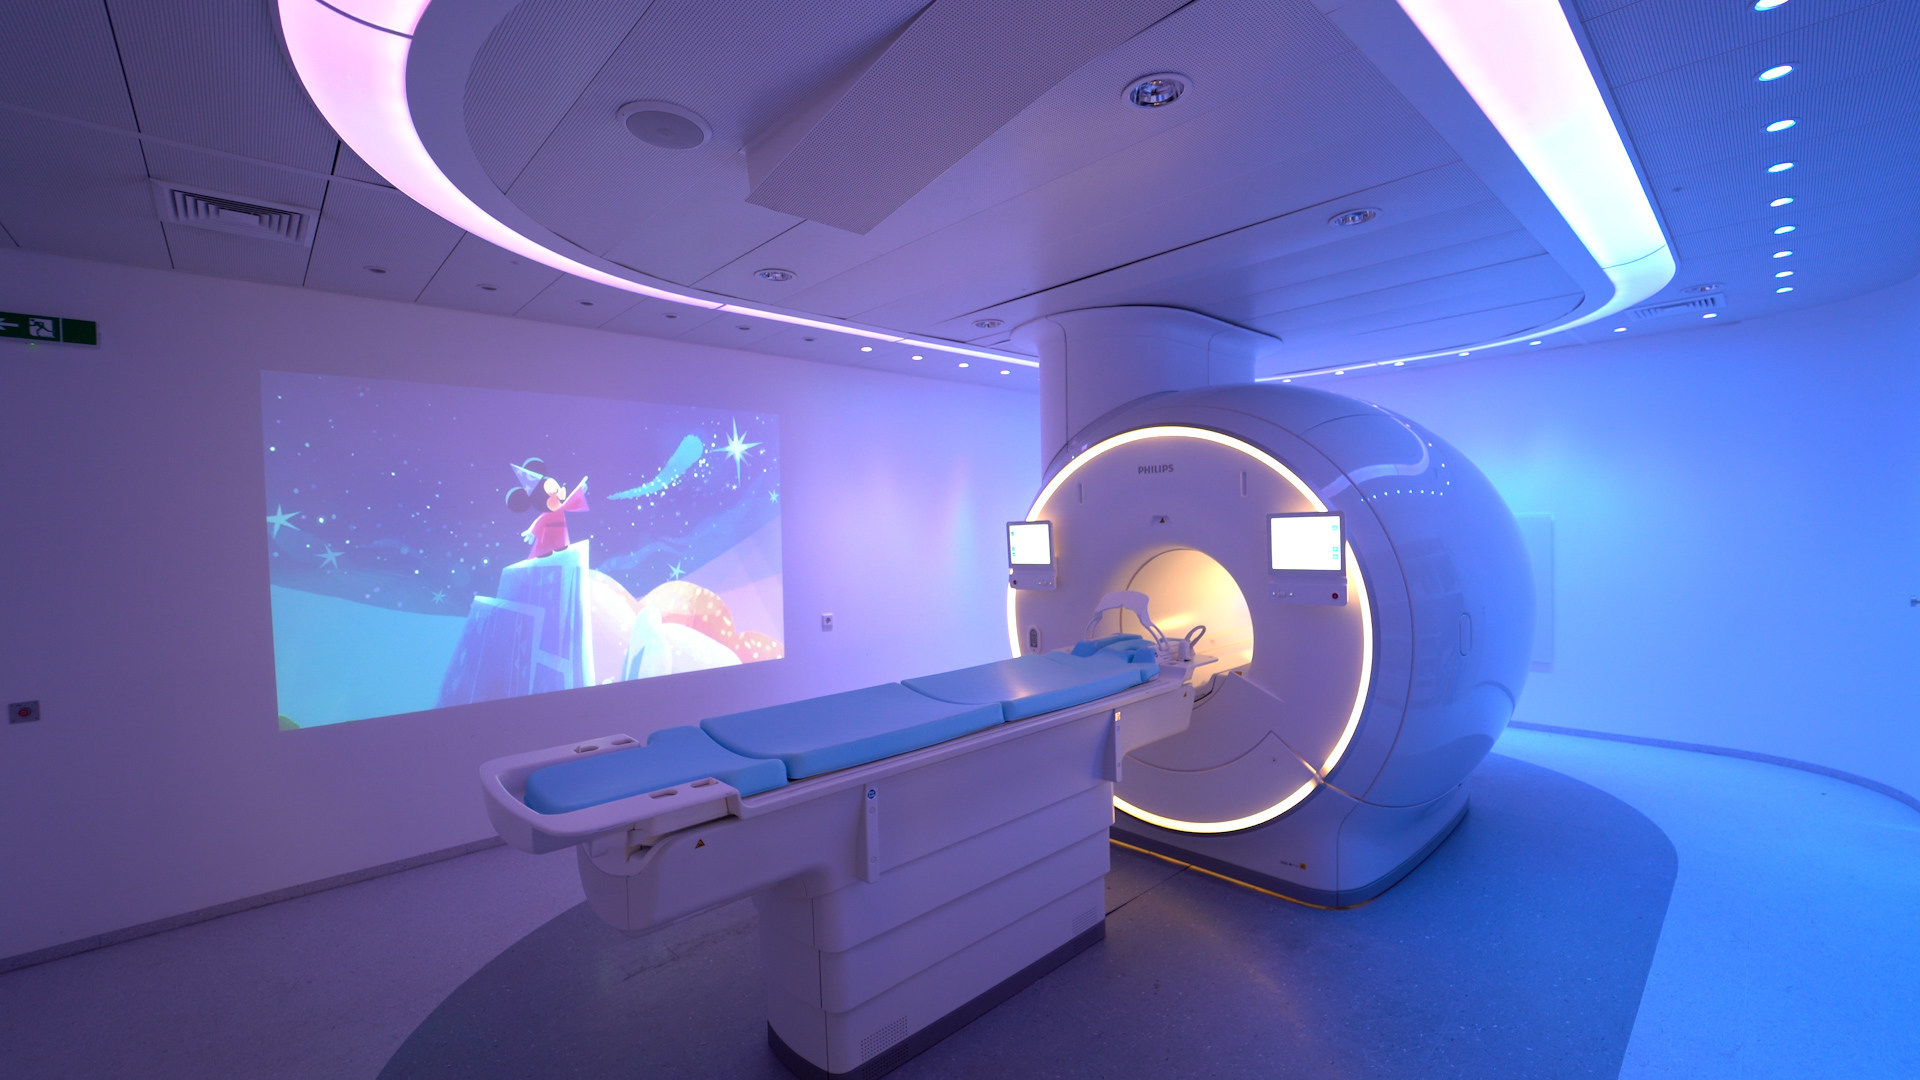 Disney and Philips team up for healthcare ambient experience